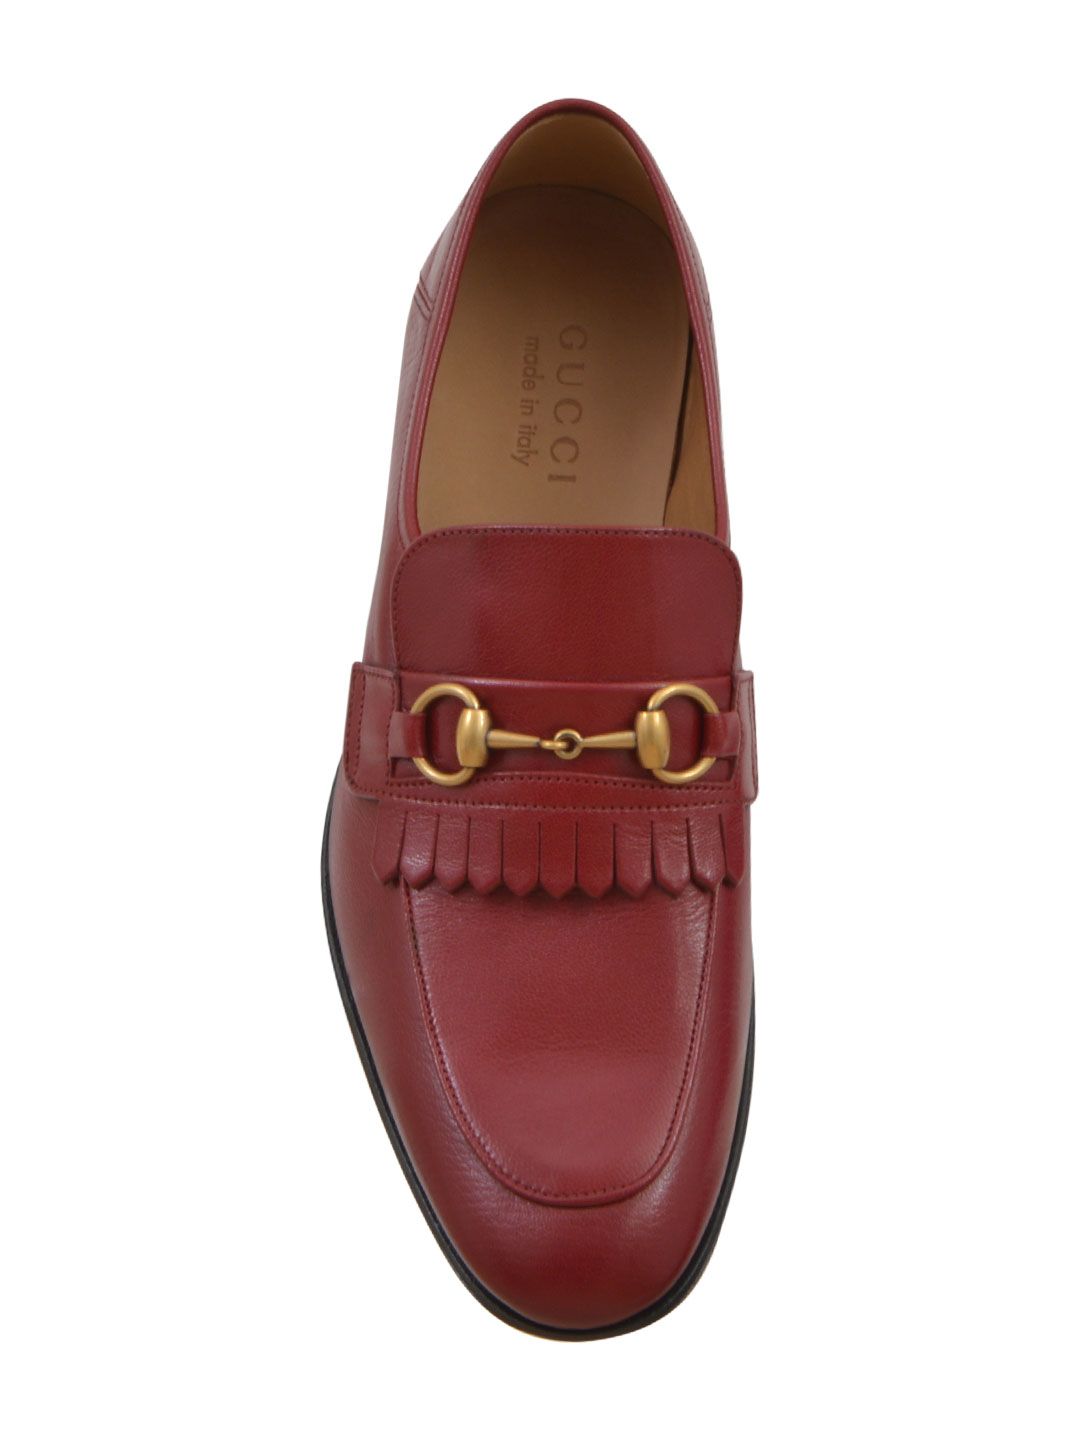 Gucci - Gucci Burgundy Bee Loafers - Bordeaux, Men's Loafers & Boat ...